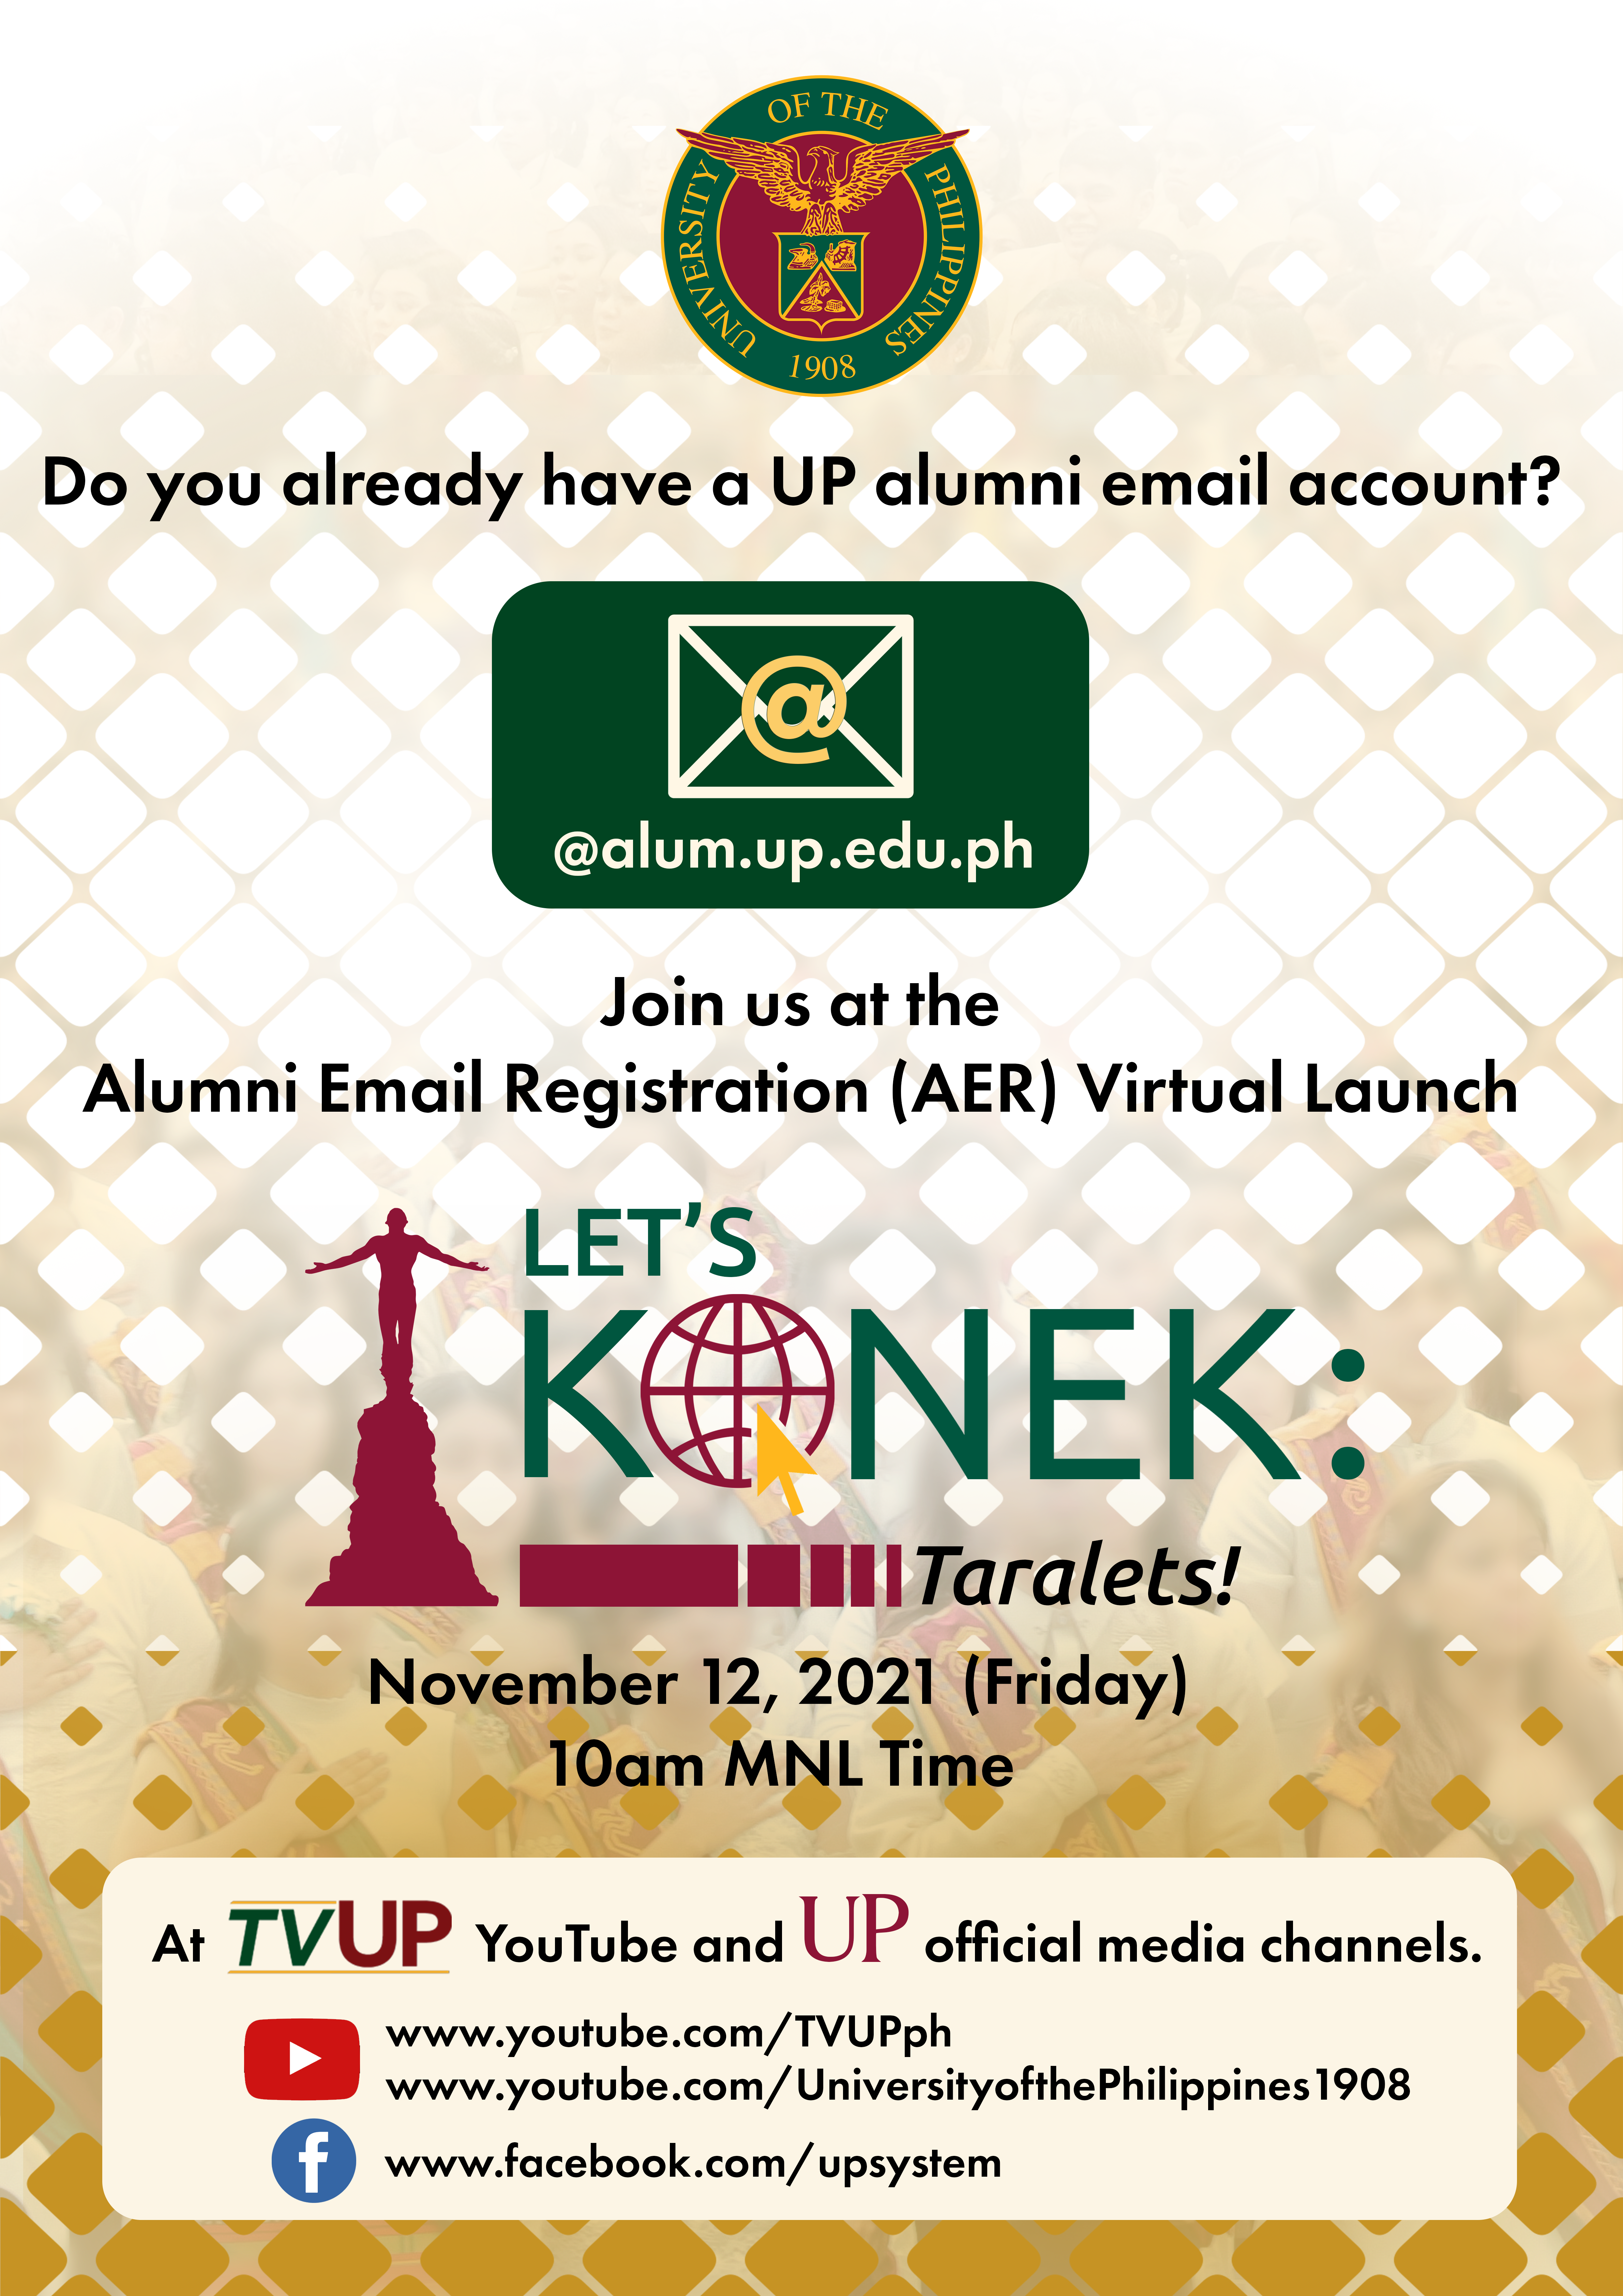 [UP AER Virtual Launch] You're Invited! Nov. 12, 2021 (Fri) 10am MNL Time